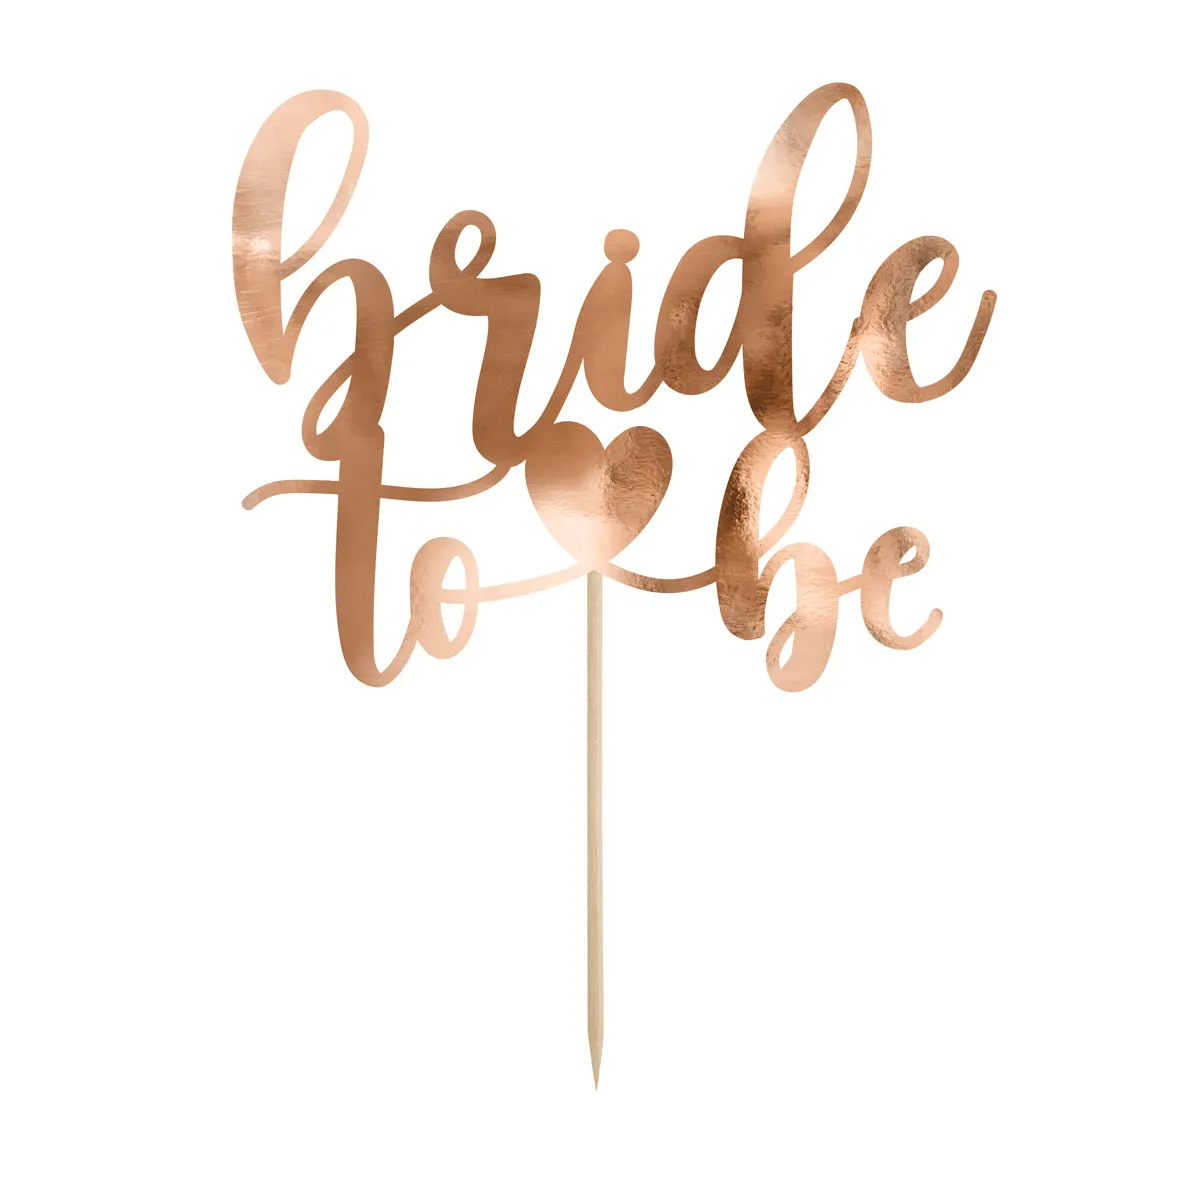 PartyDeco Cake Topper Bride To Be - Rose Goud